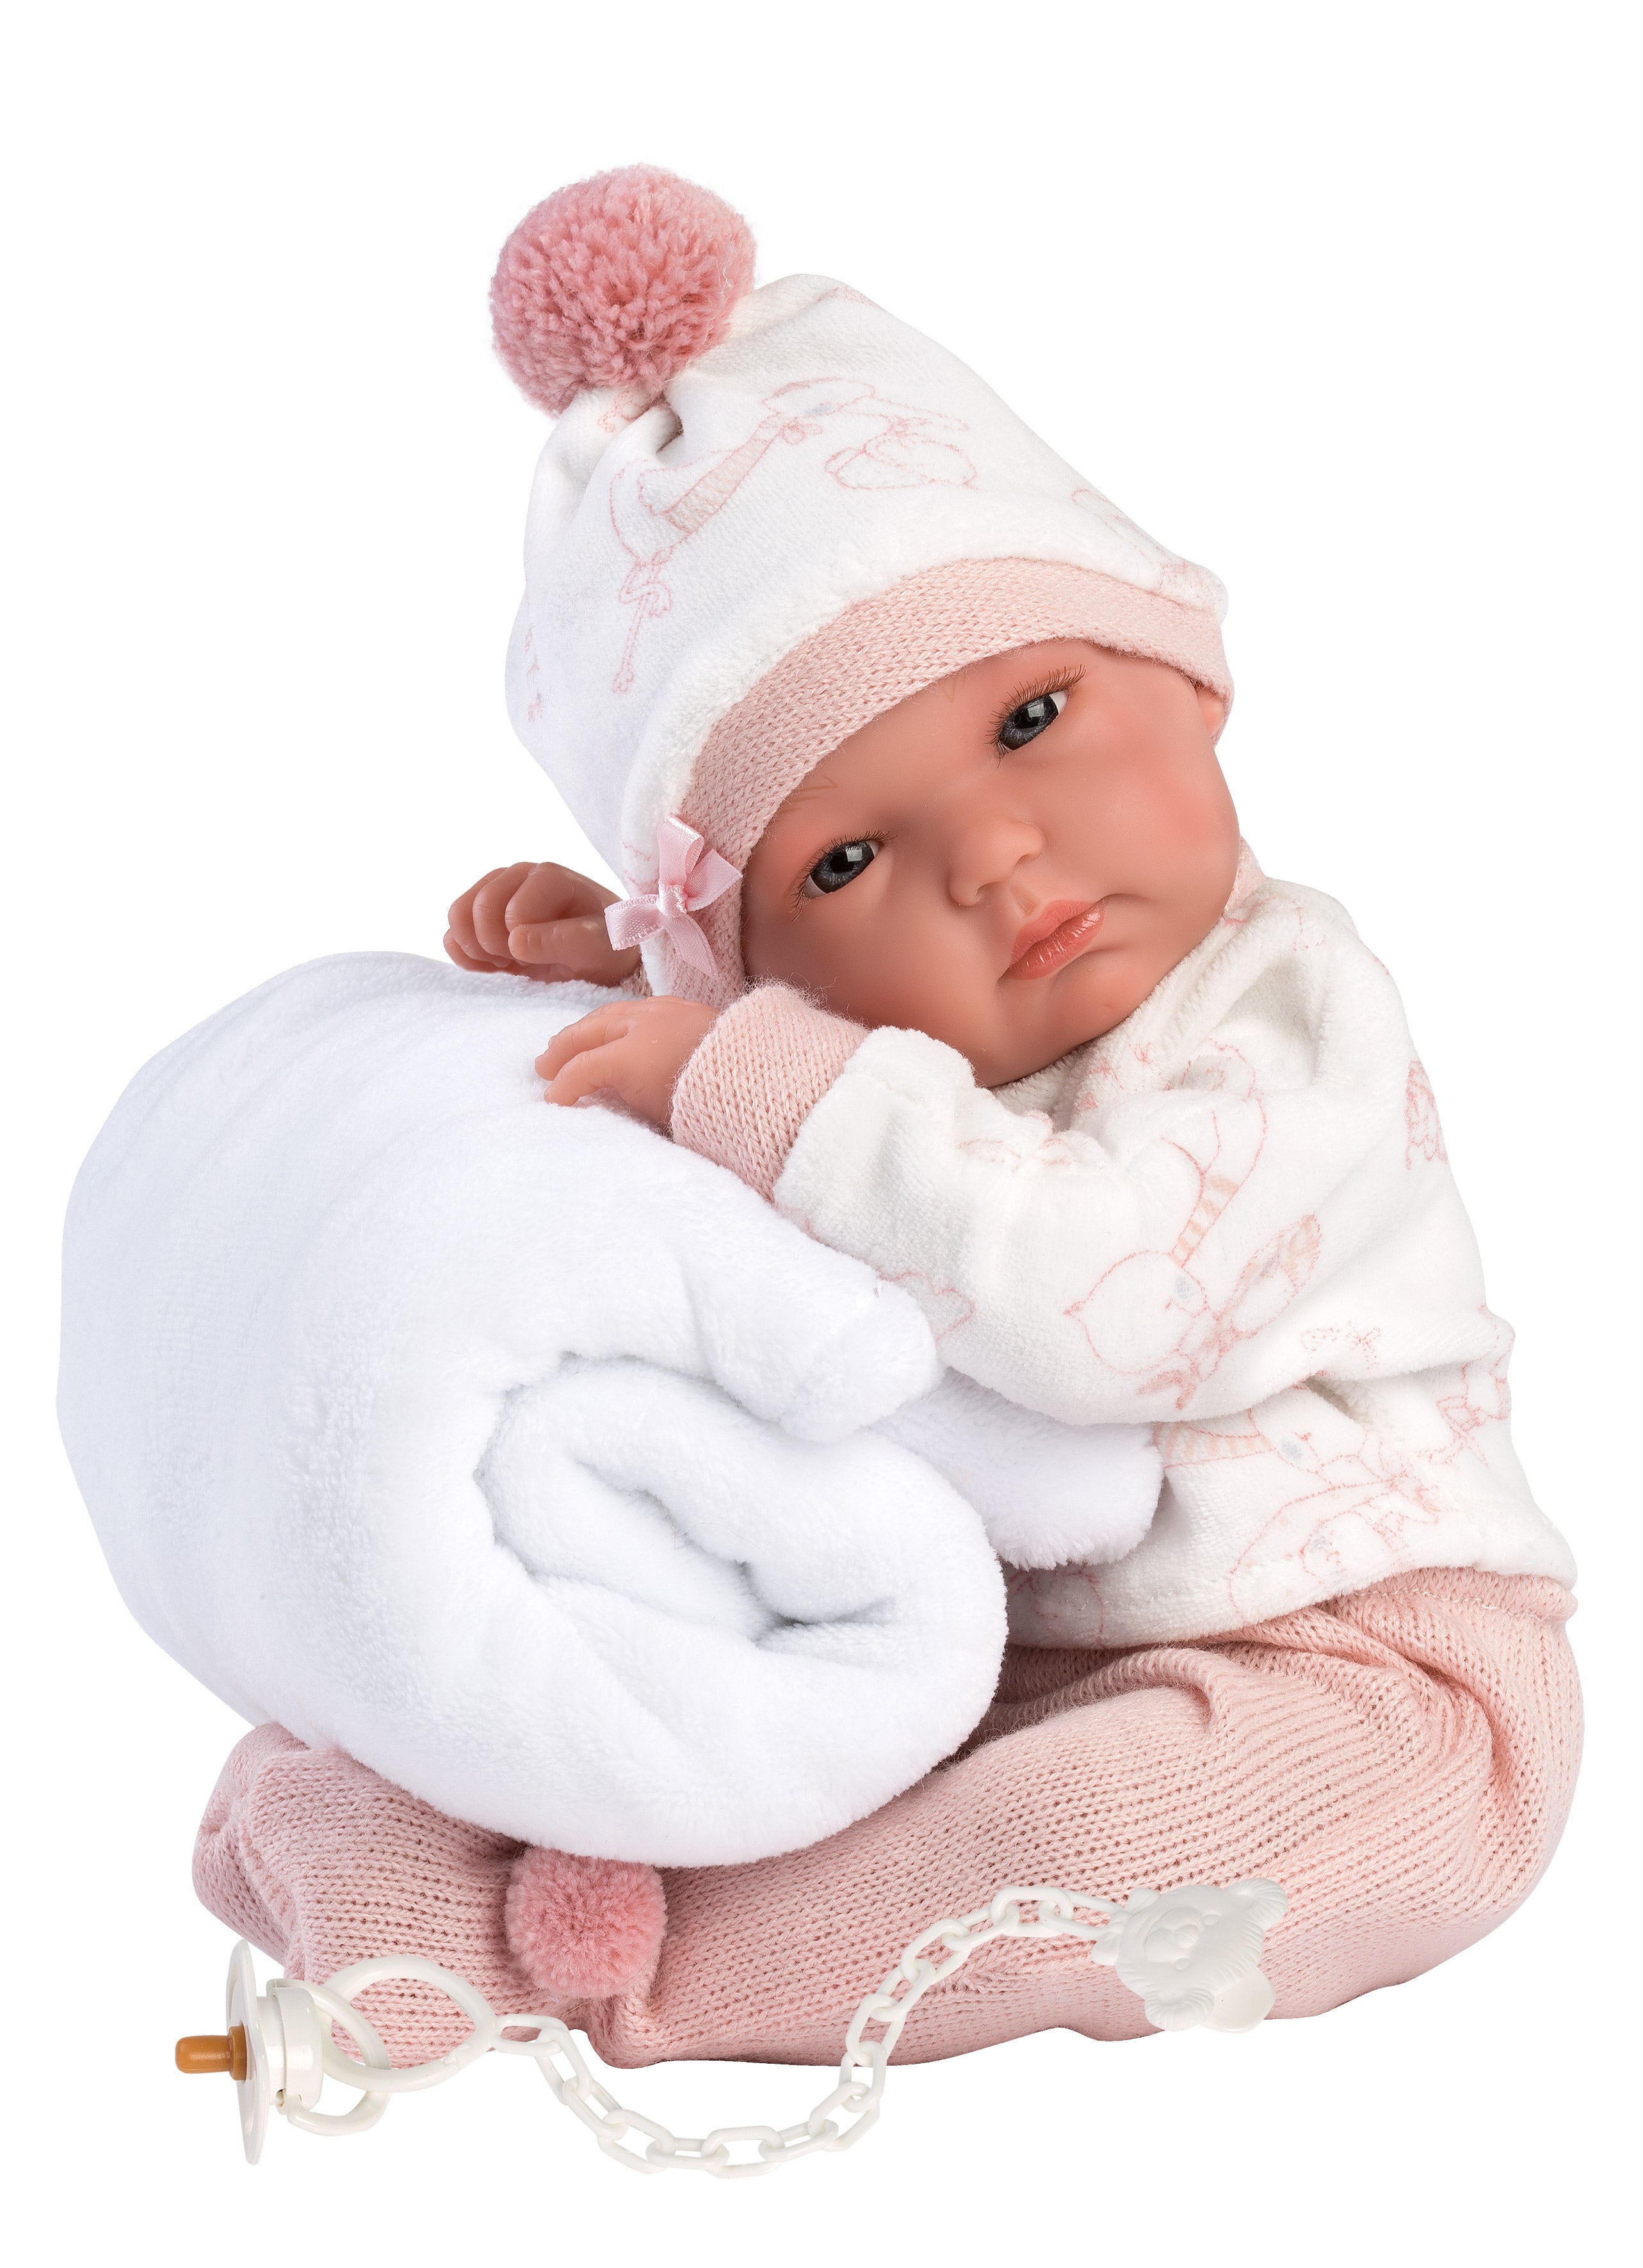 Llorens 13.8" Anatomically-correct Baby Doll Brandy with Blanket Dolls